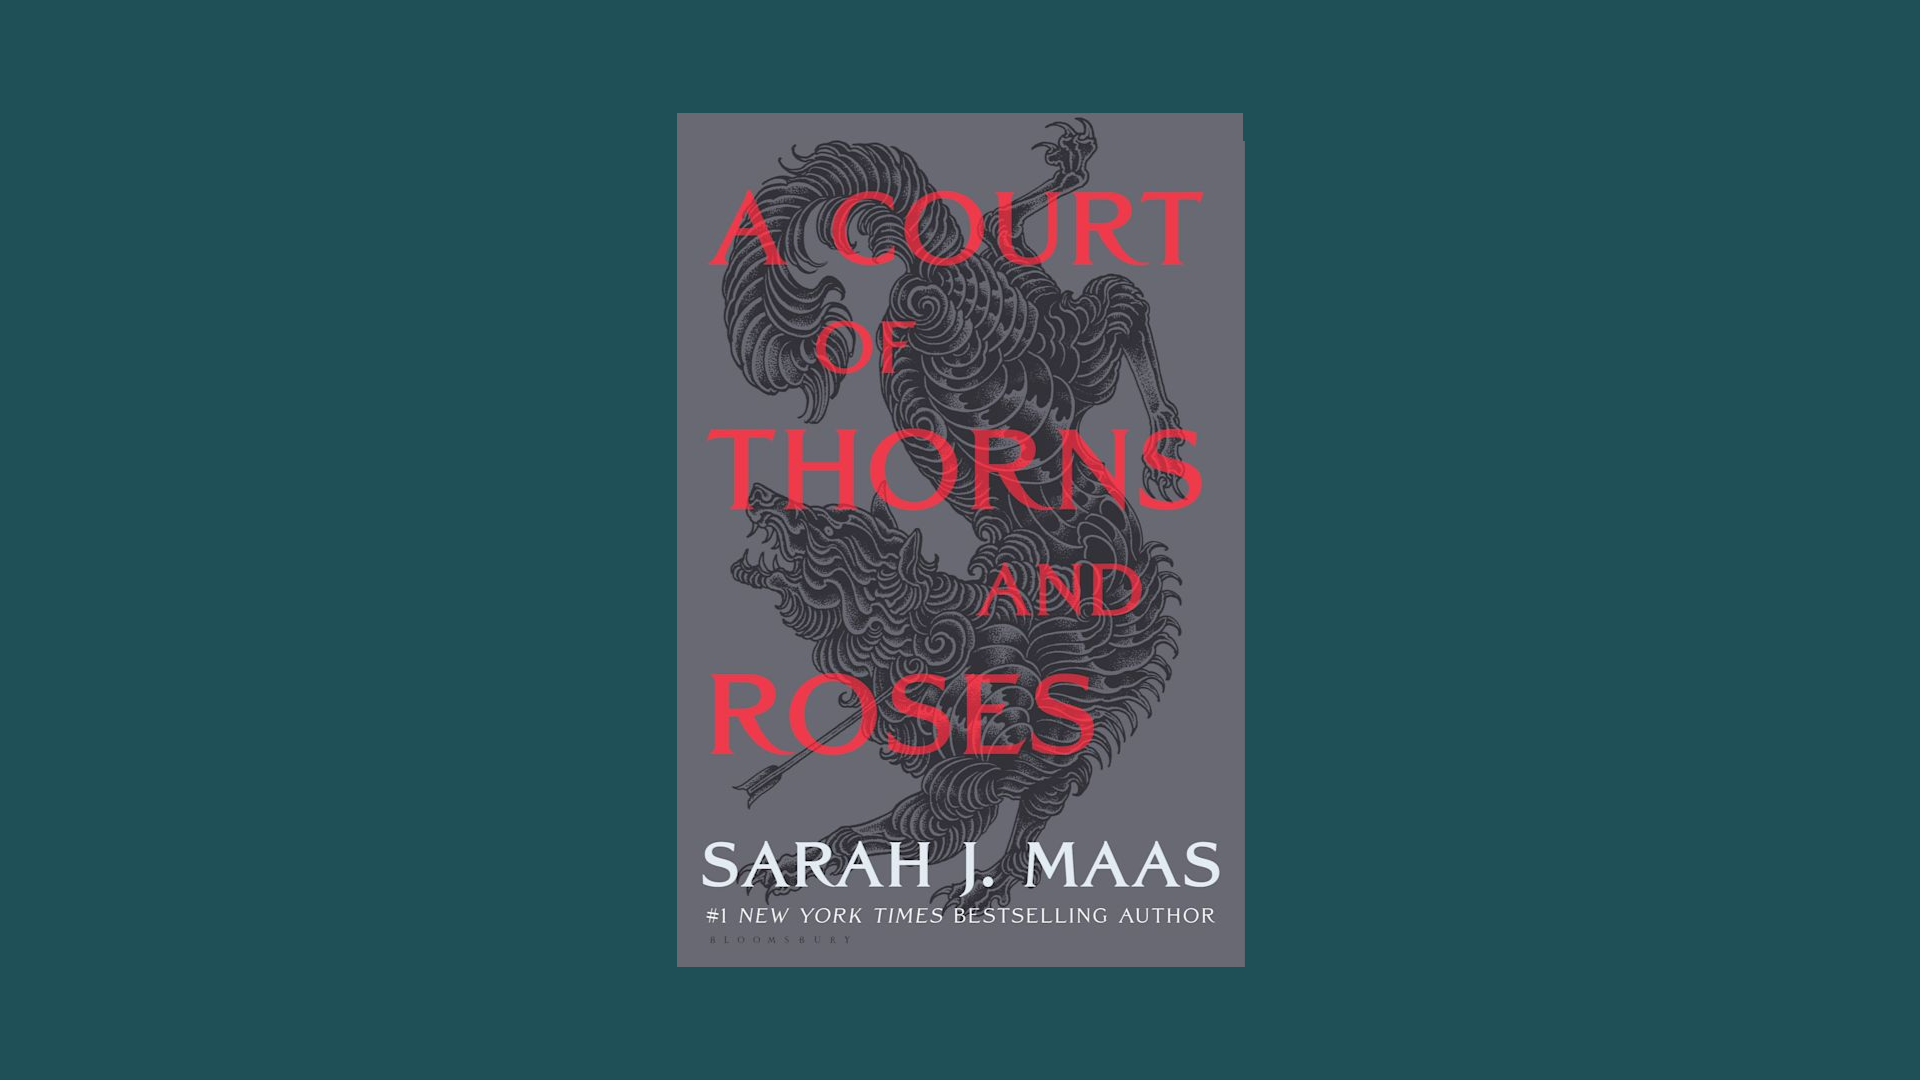 “A Court of Thorns and Roses” by Sarah J. Maas